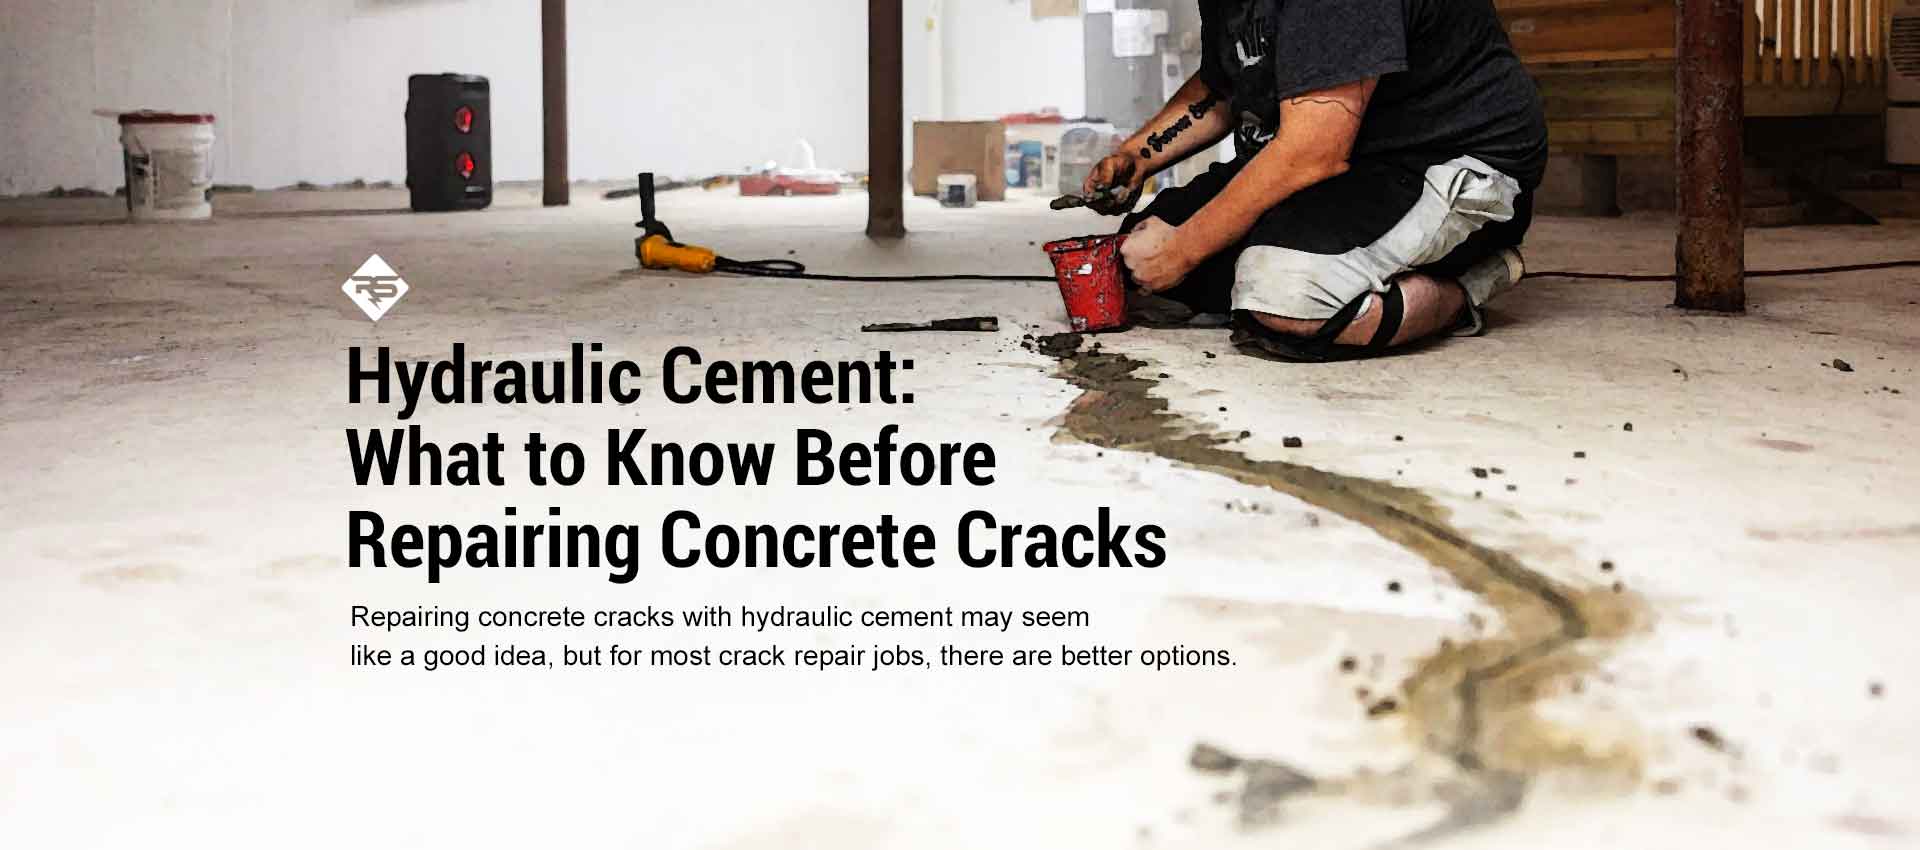 Stop Repairing Concrete Cracks With Hydraulic Cement - Here's Why